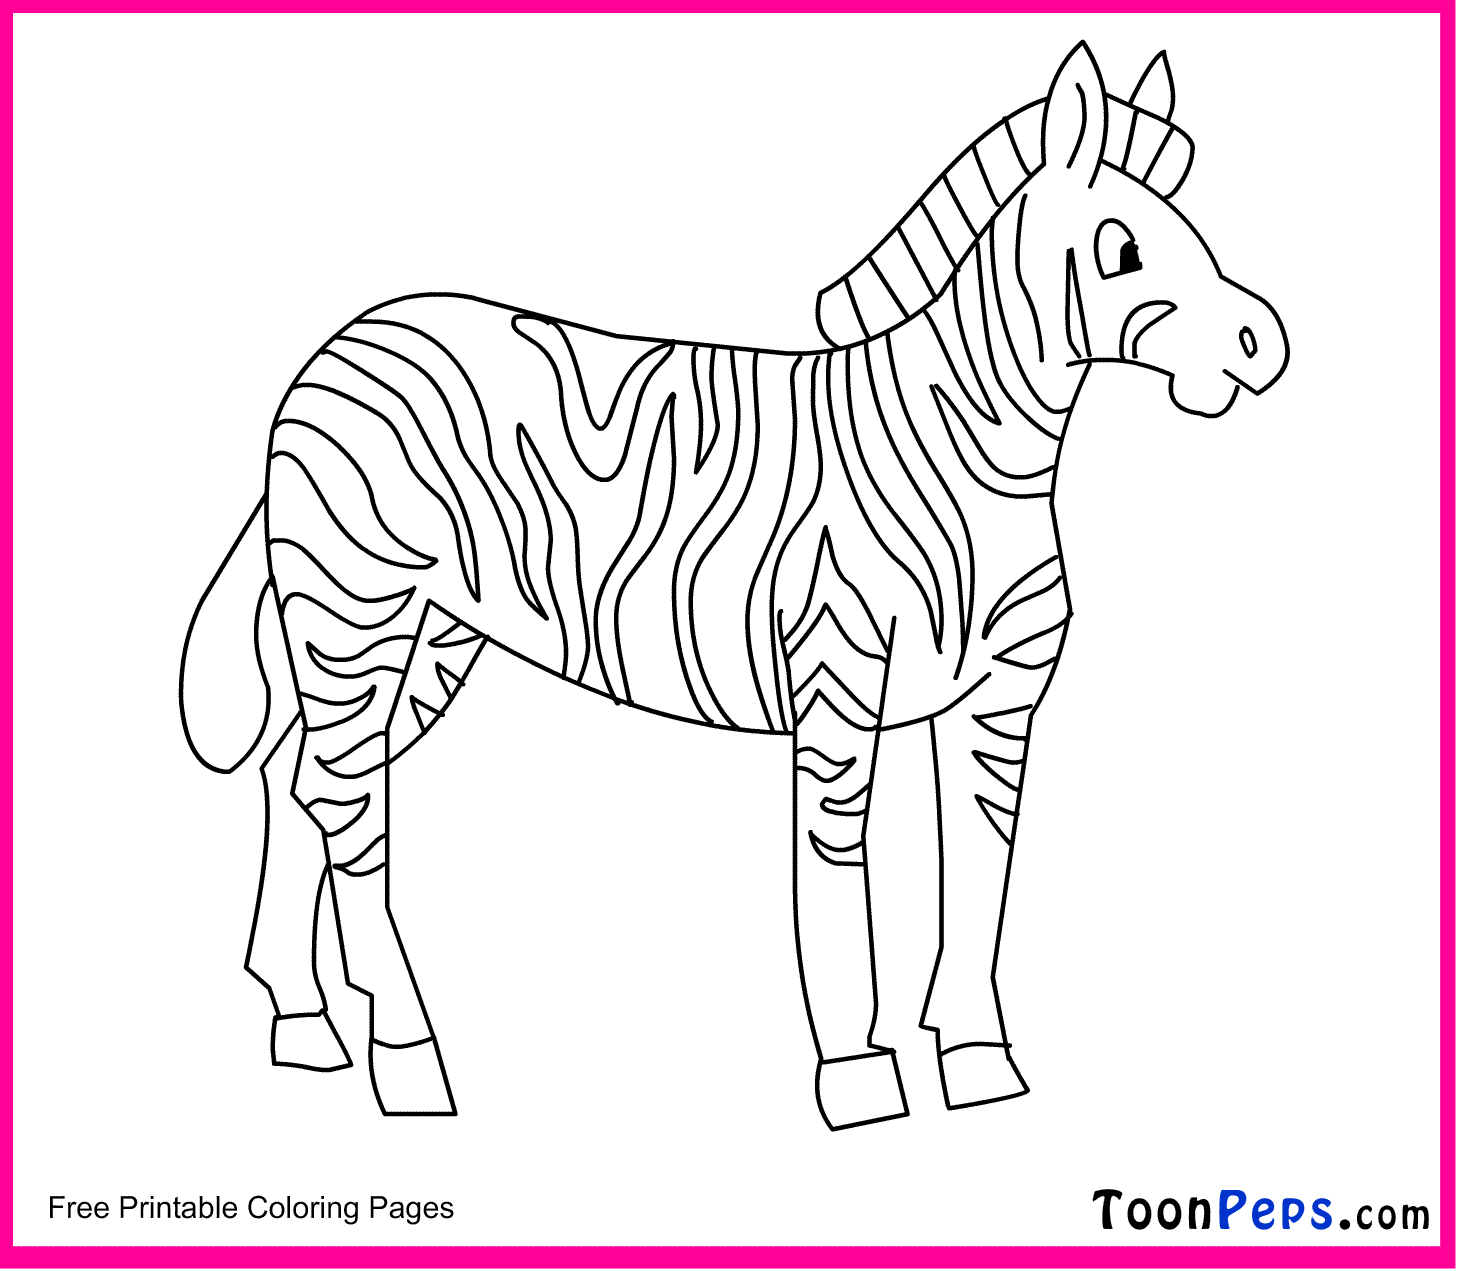 Toonpeps Free Printable Zebra Coloring Pages For Kids